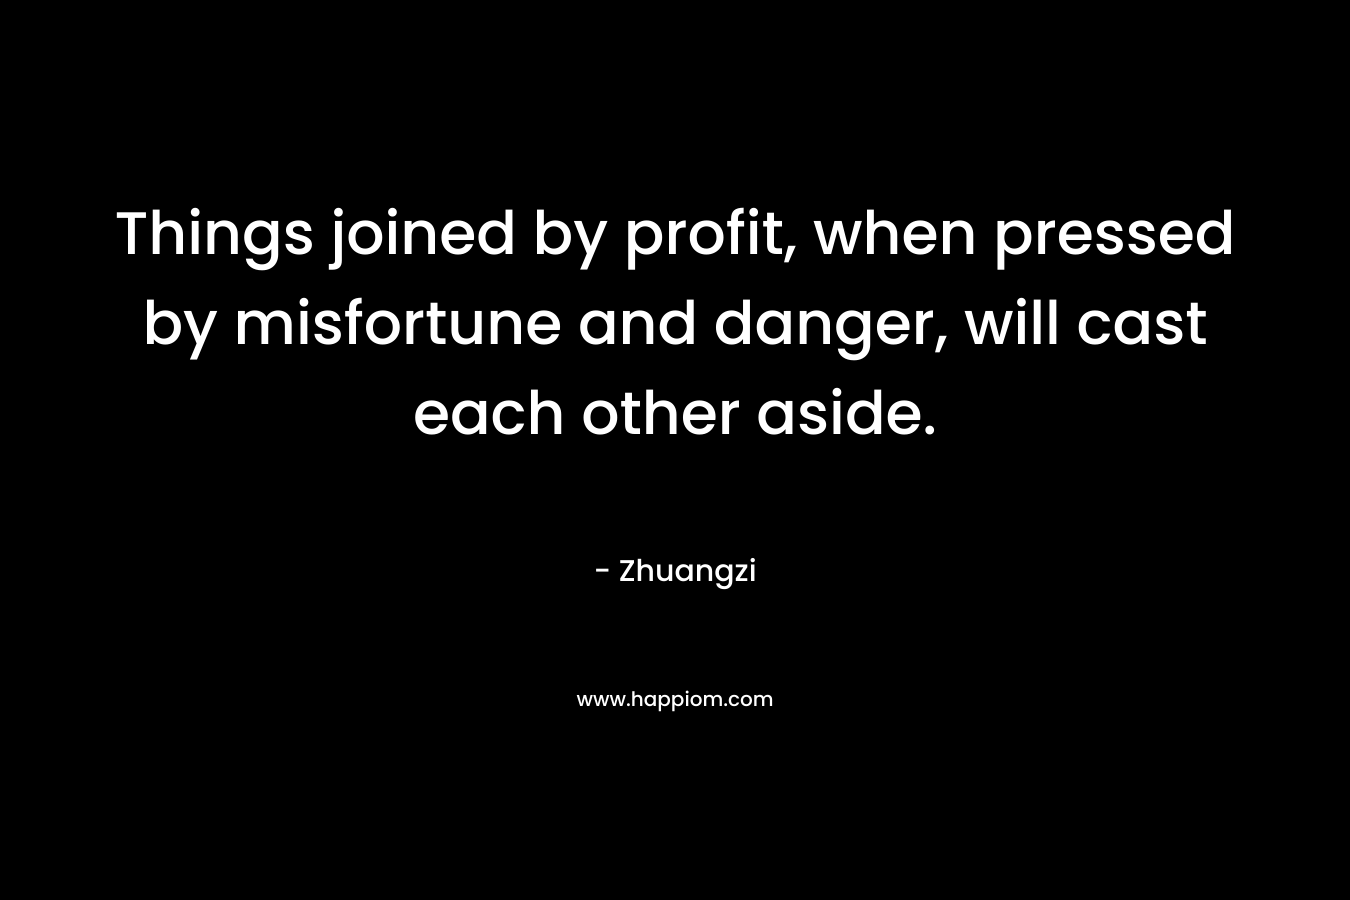 Things joined by profit, when pressed by misfortune and danger, will cast each other aside. – Zhuangzi